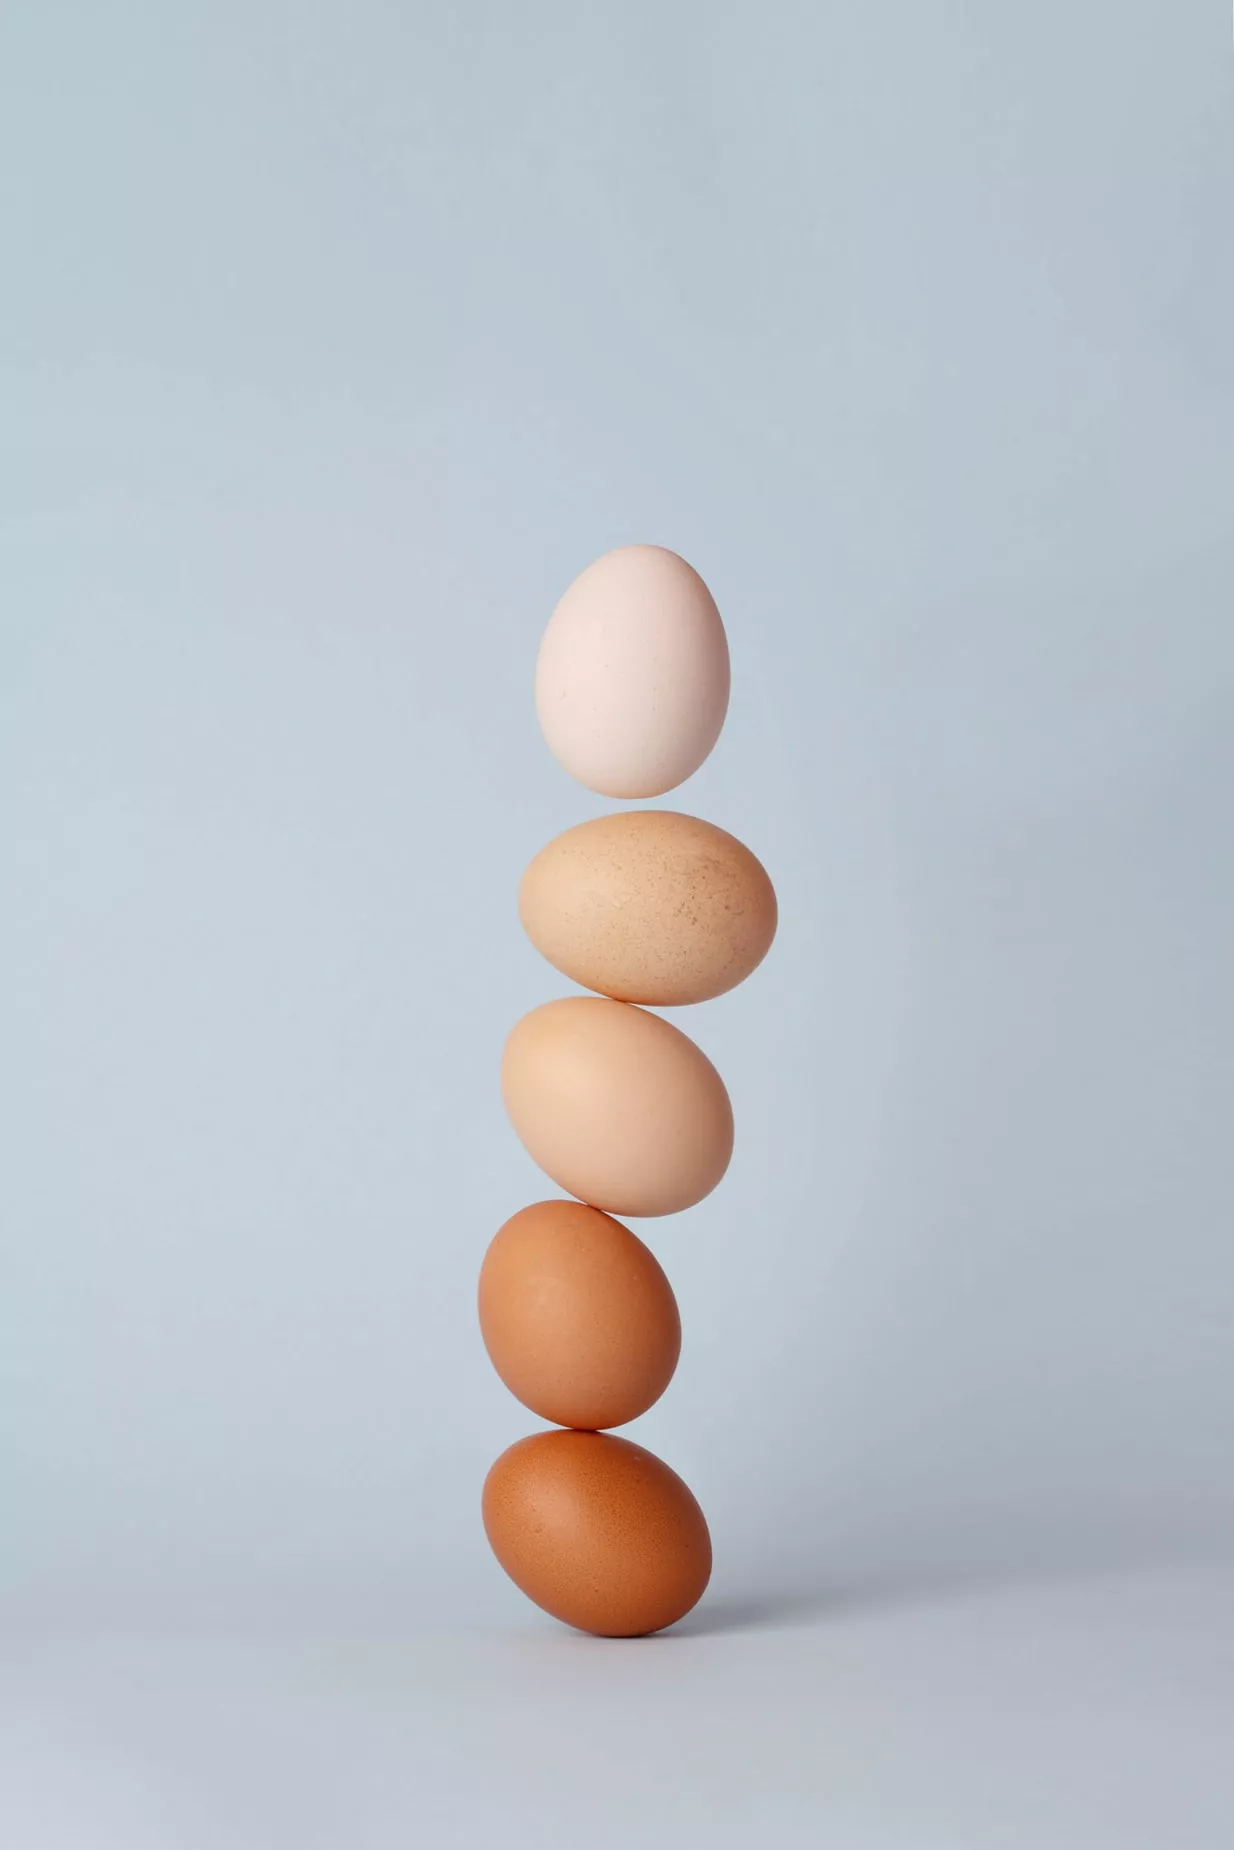 Different Kinds Of Eggs Stacked In A Row